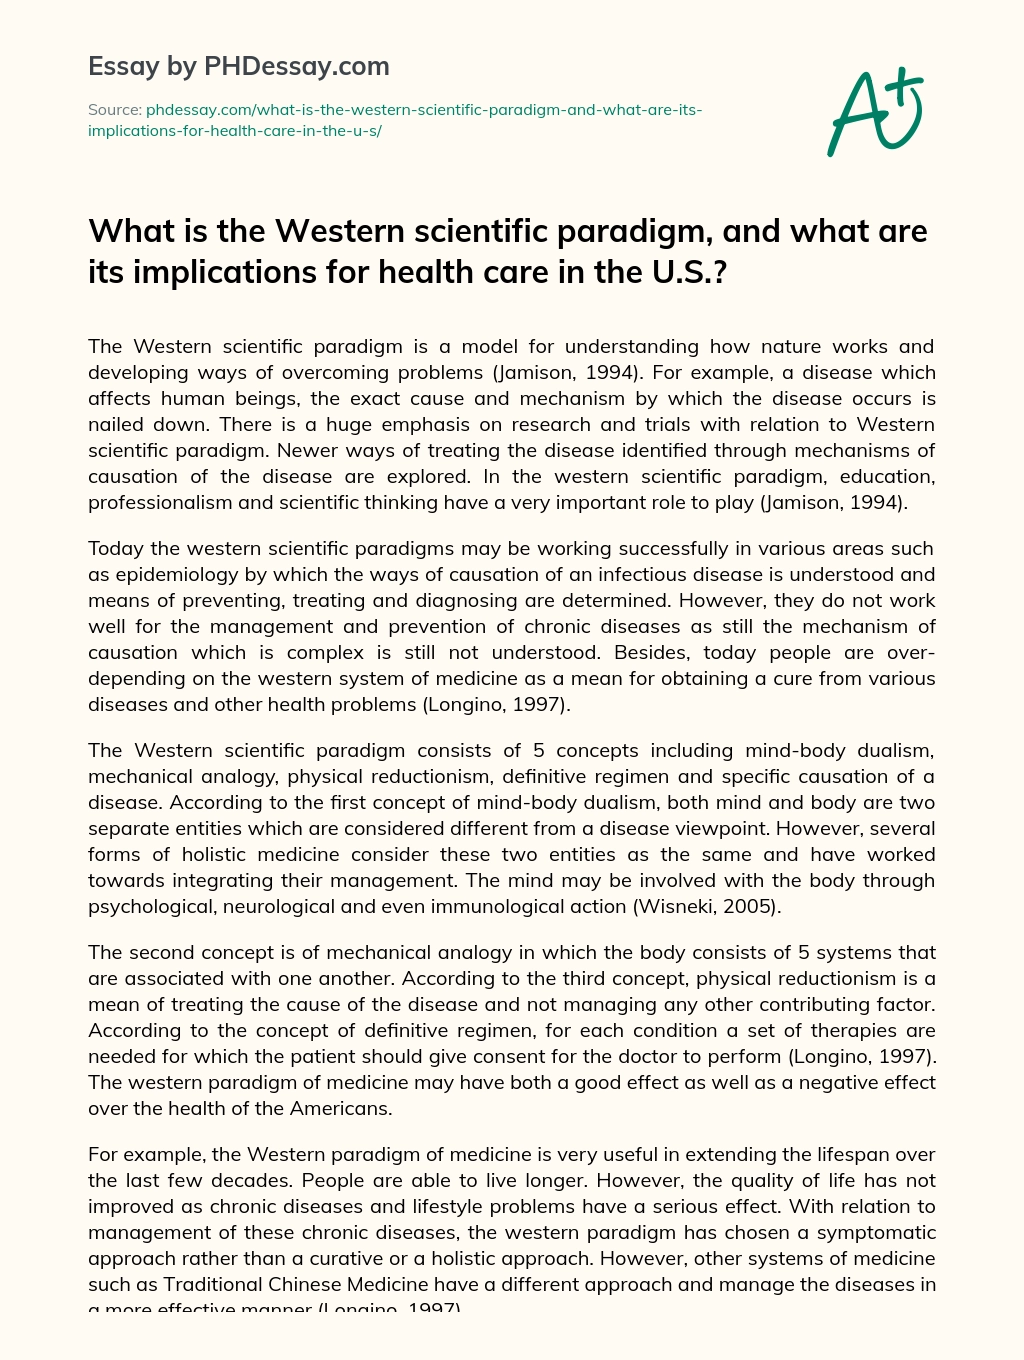 What is the Western scientific paradigm, and what are its implications for health care in the U.S.? essay